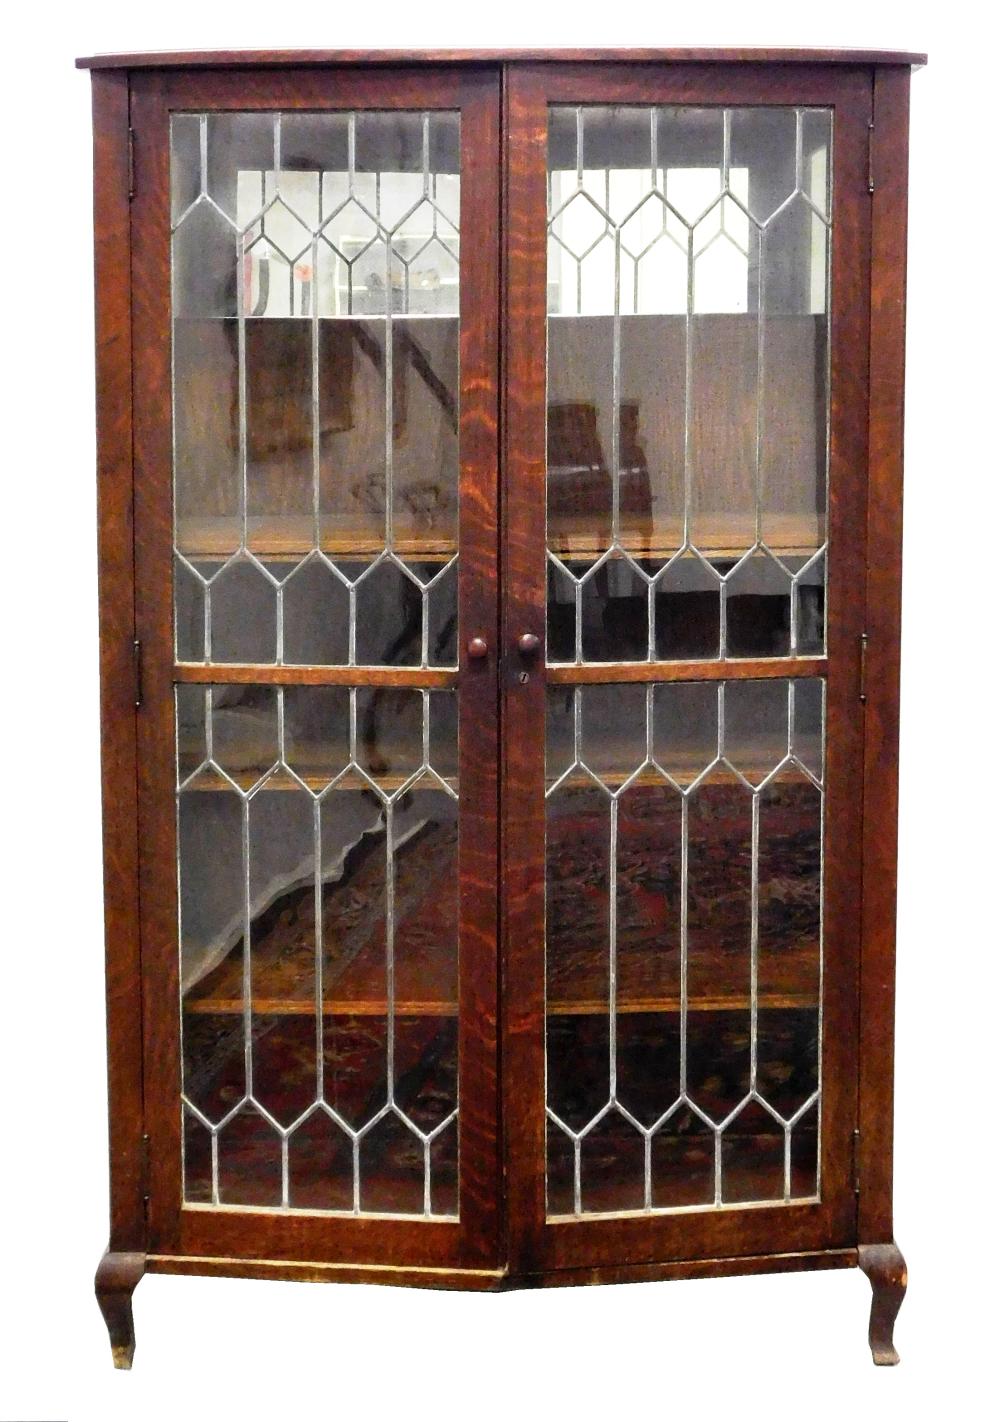 BOOKCASE, OAK WITH LEADED GLASS PANEL